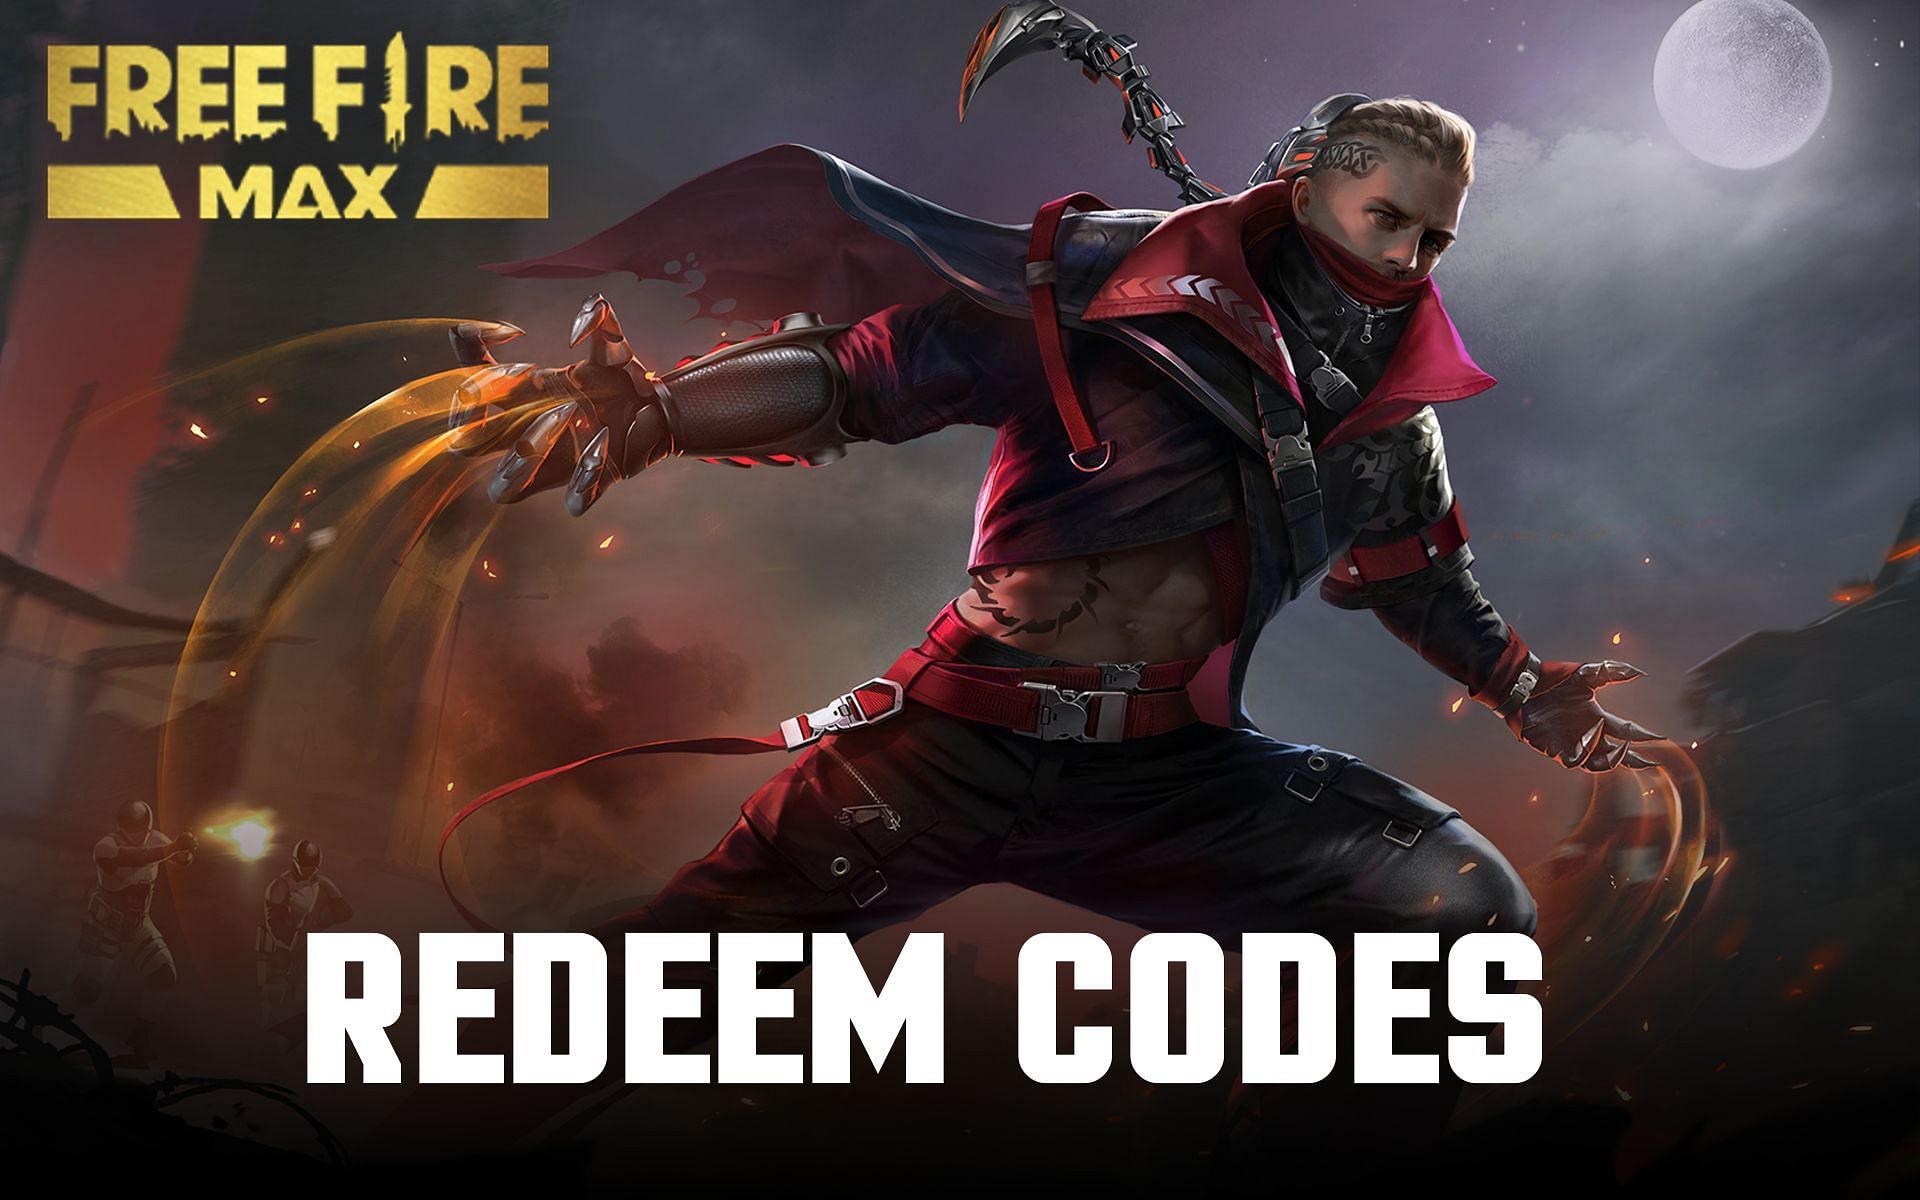 Redeem codes are a good way to earn free rewards in Free Fire MAX (Image via Sportskeeda)